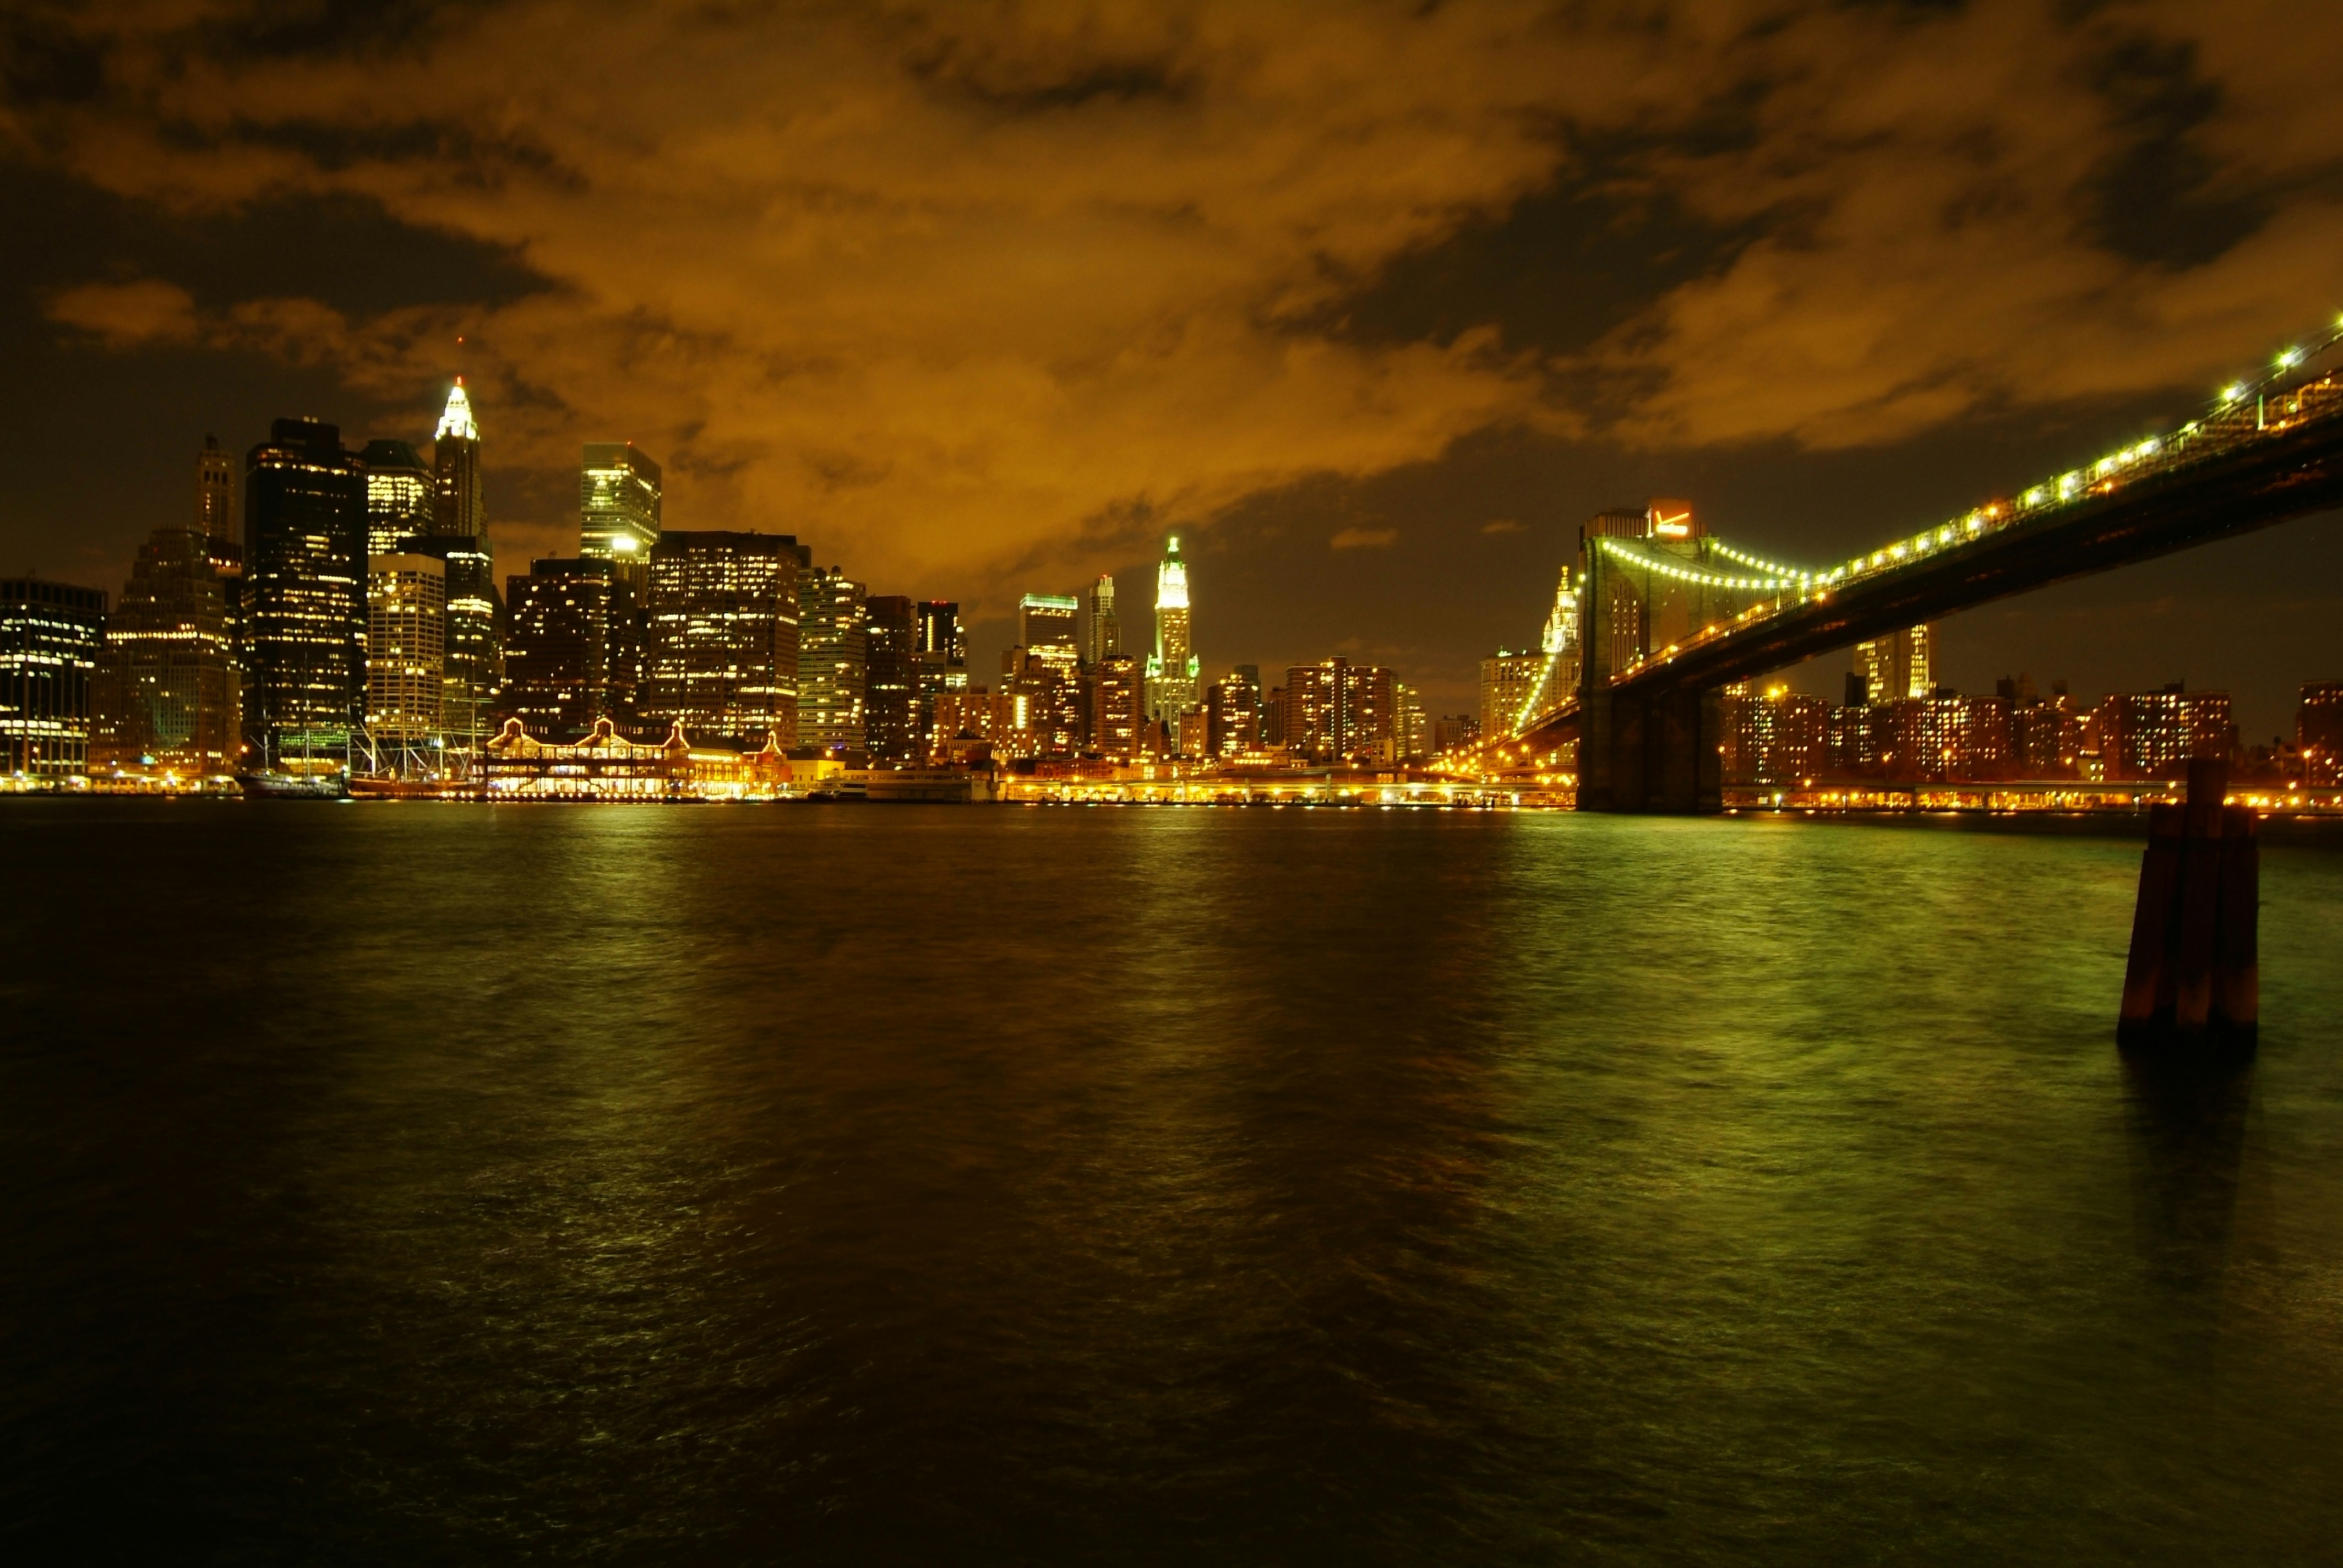 A night skyline on the top of the Hudson river, from a peculiar point of view.